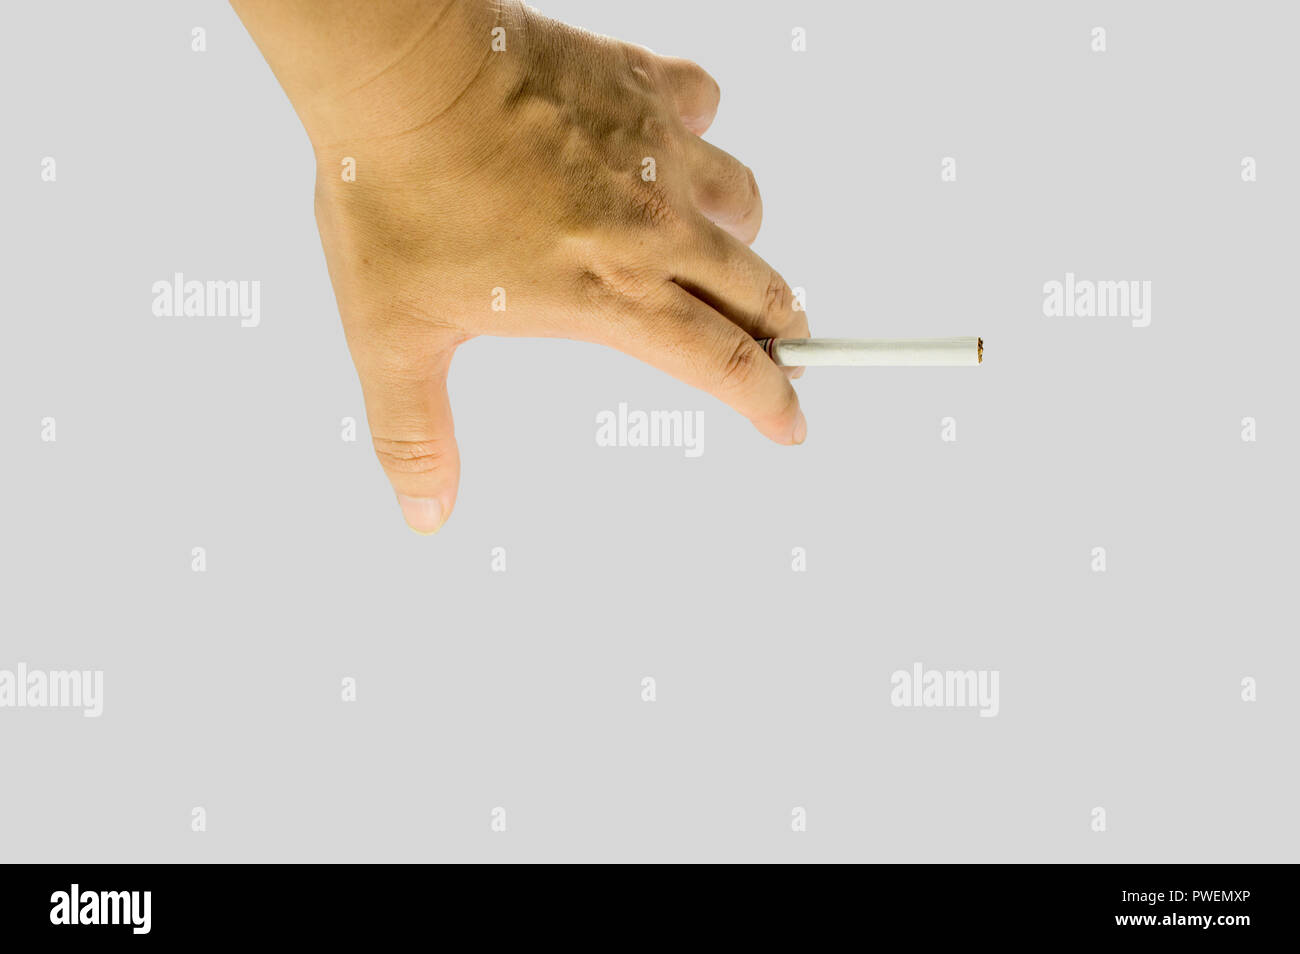 Hand holding a cigarette. Unlighted cigarette holden between two fingers. Stock Photo